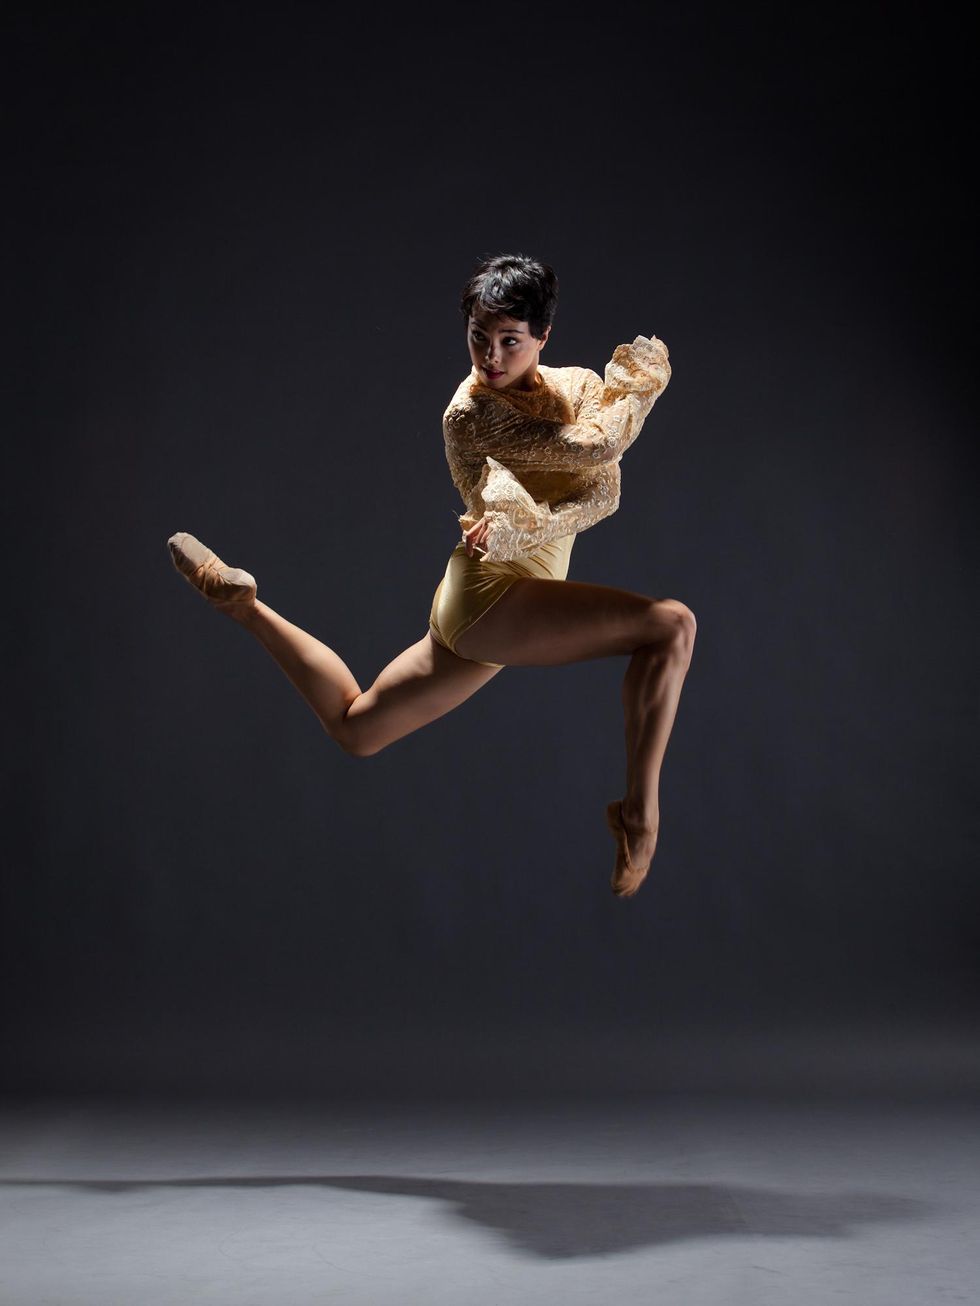 Allison Walsh jumps high on a grey background, legs split in either direction and bent at 90 degree angles